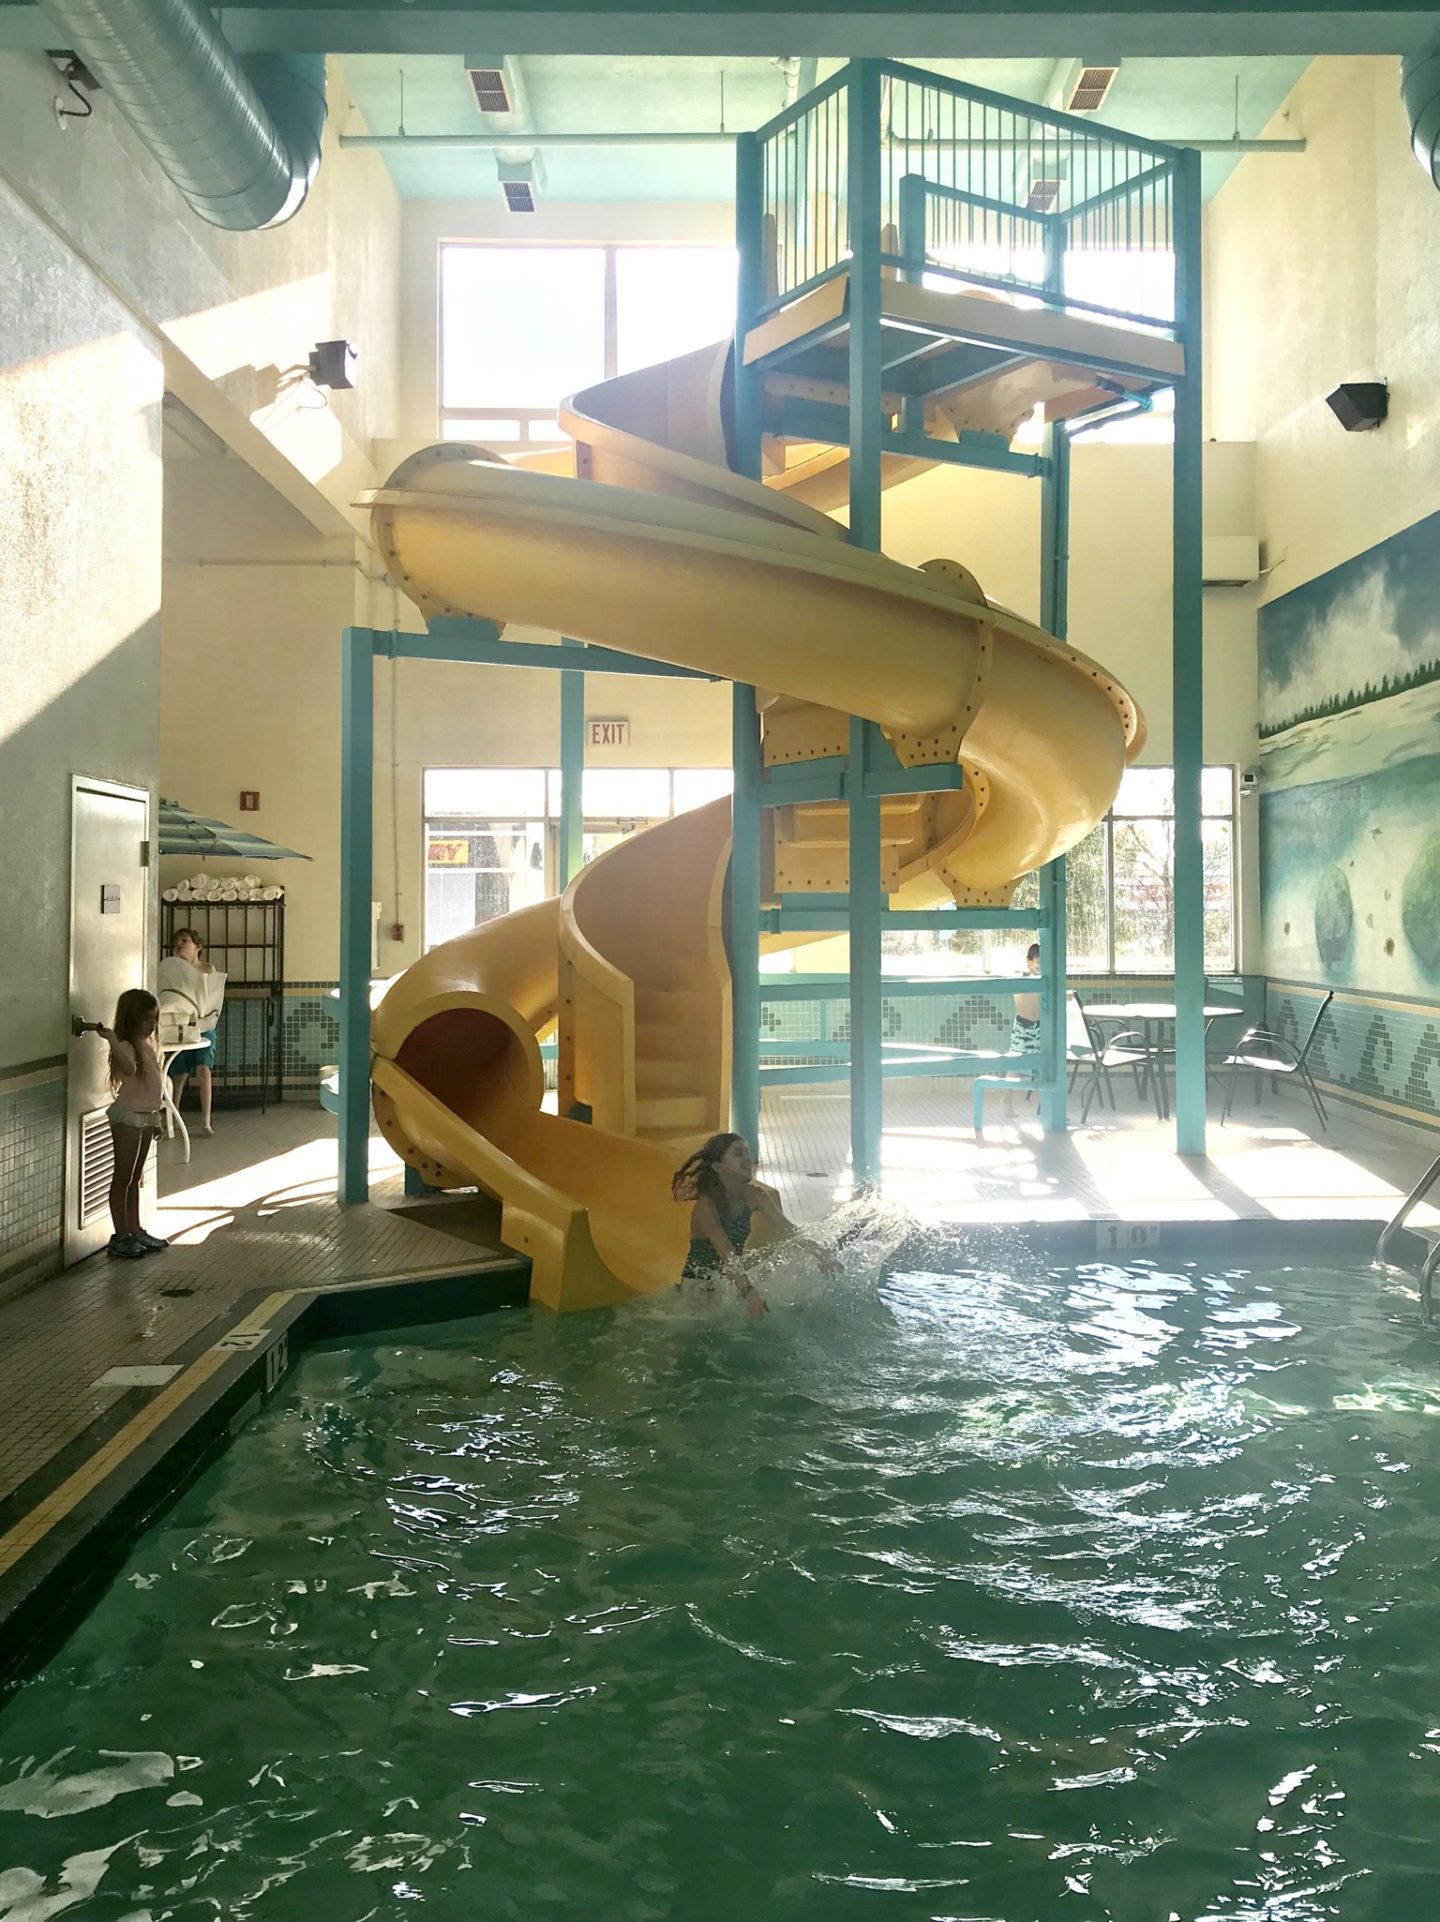 It may be hard to convince our kids that breaking down was a bad thing. Although we chose an economical hotel, it did come with free breakfast and a pool with a waterslide!